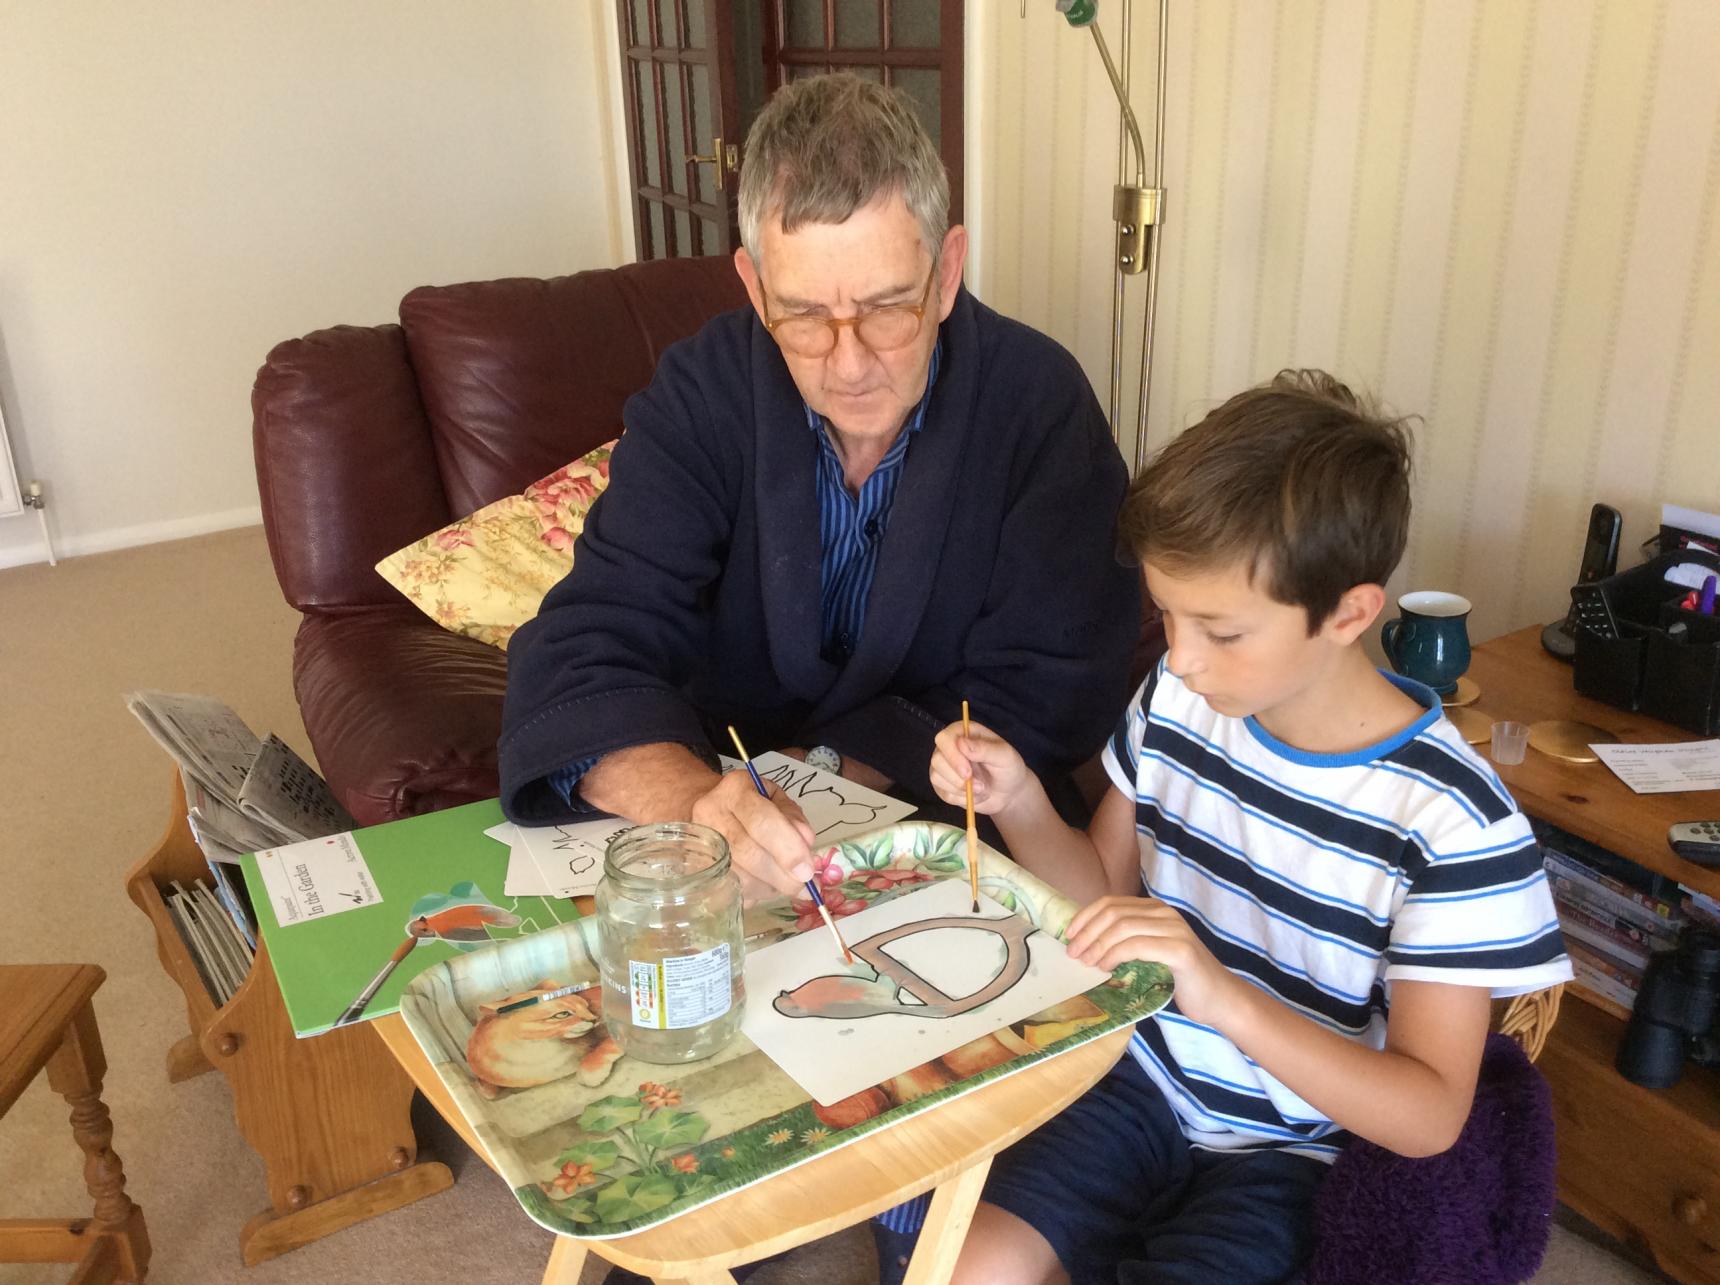 Keith painting with his grandson